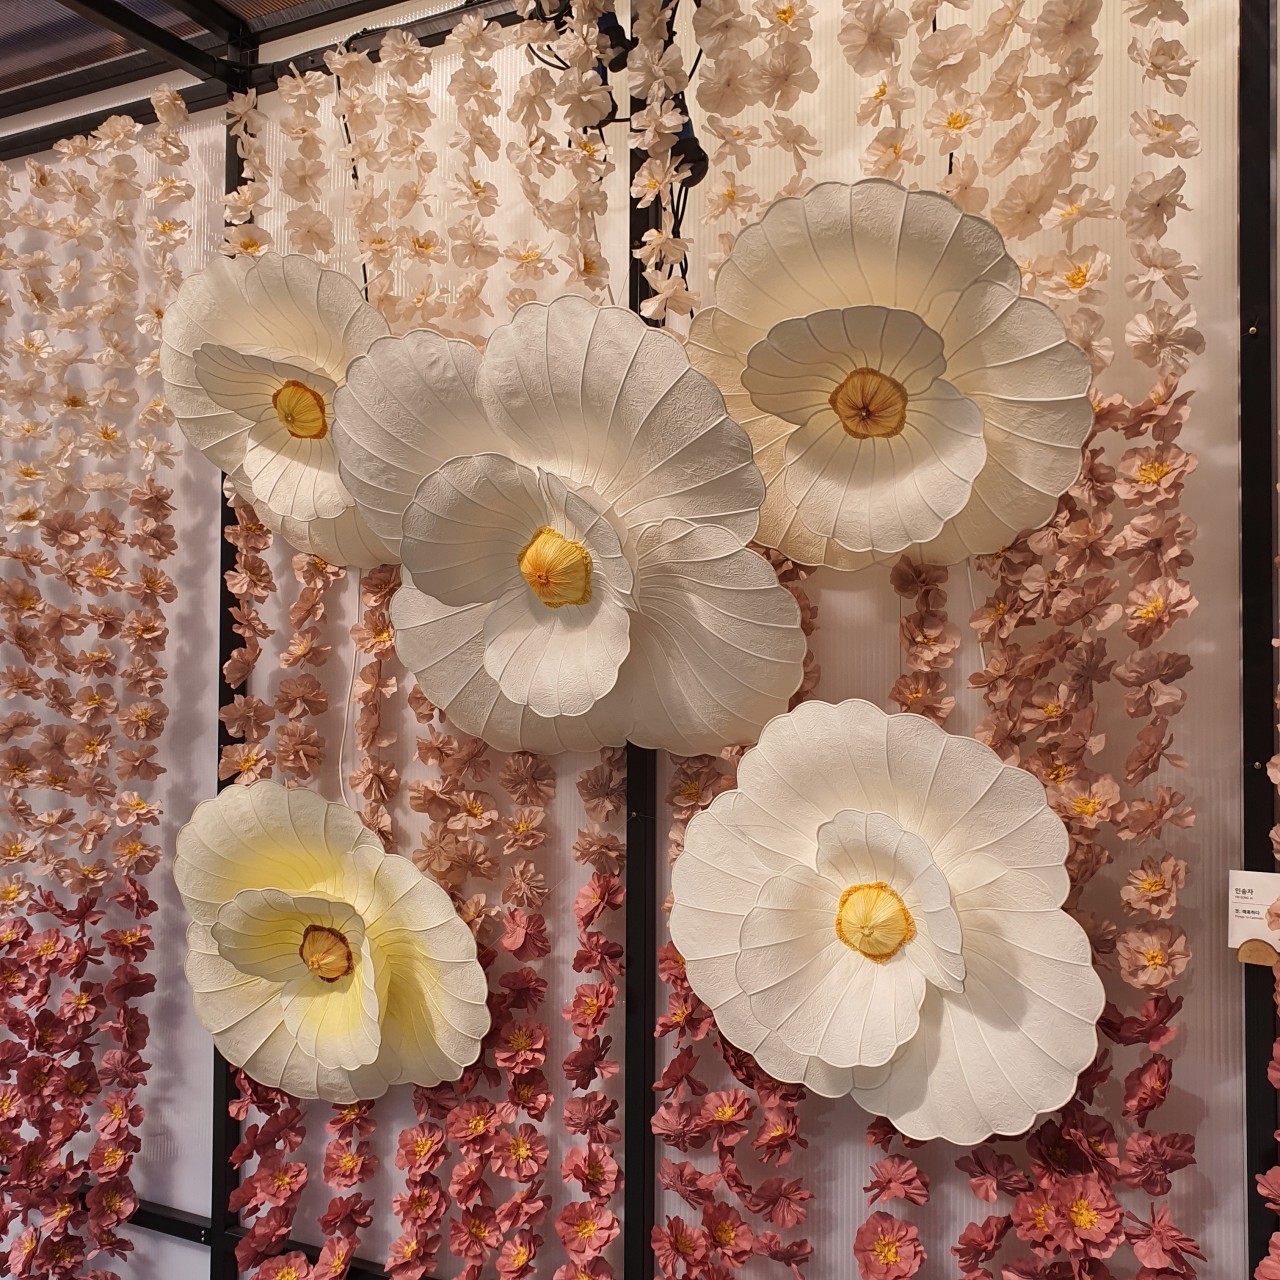 Hanji flowers from Wonju, Gangwon Province, are exhibited near Sujeongjeon, one of the buildings within Gyeongbokgung in Seoul. (Royal Culture Festival)